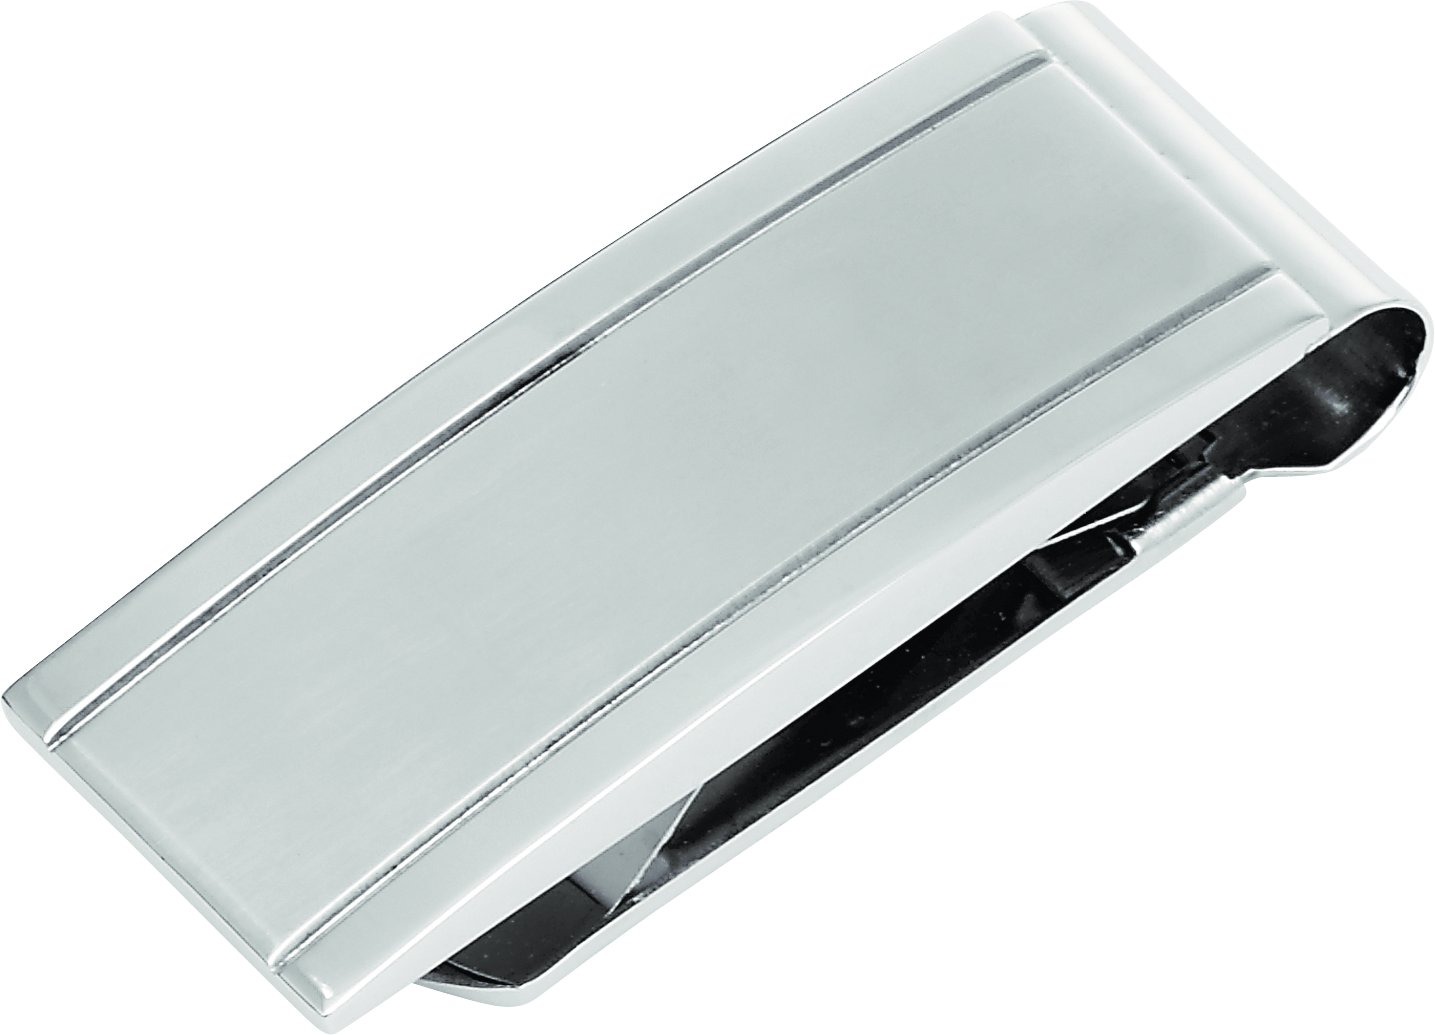 Stainless Steel 53.3x19.5 mm Money Clip